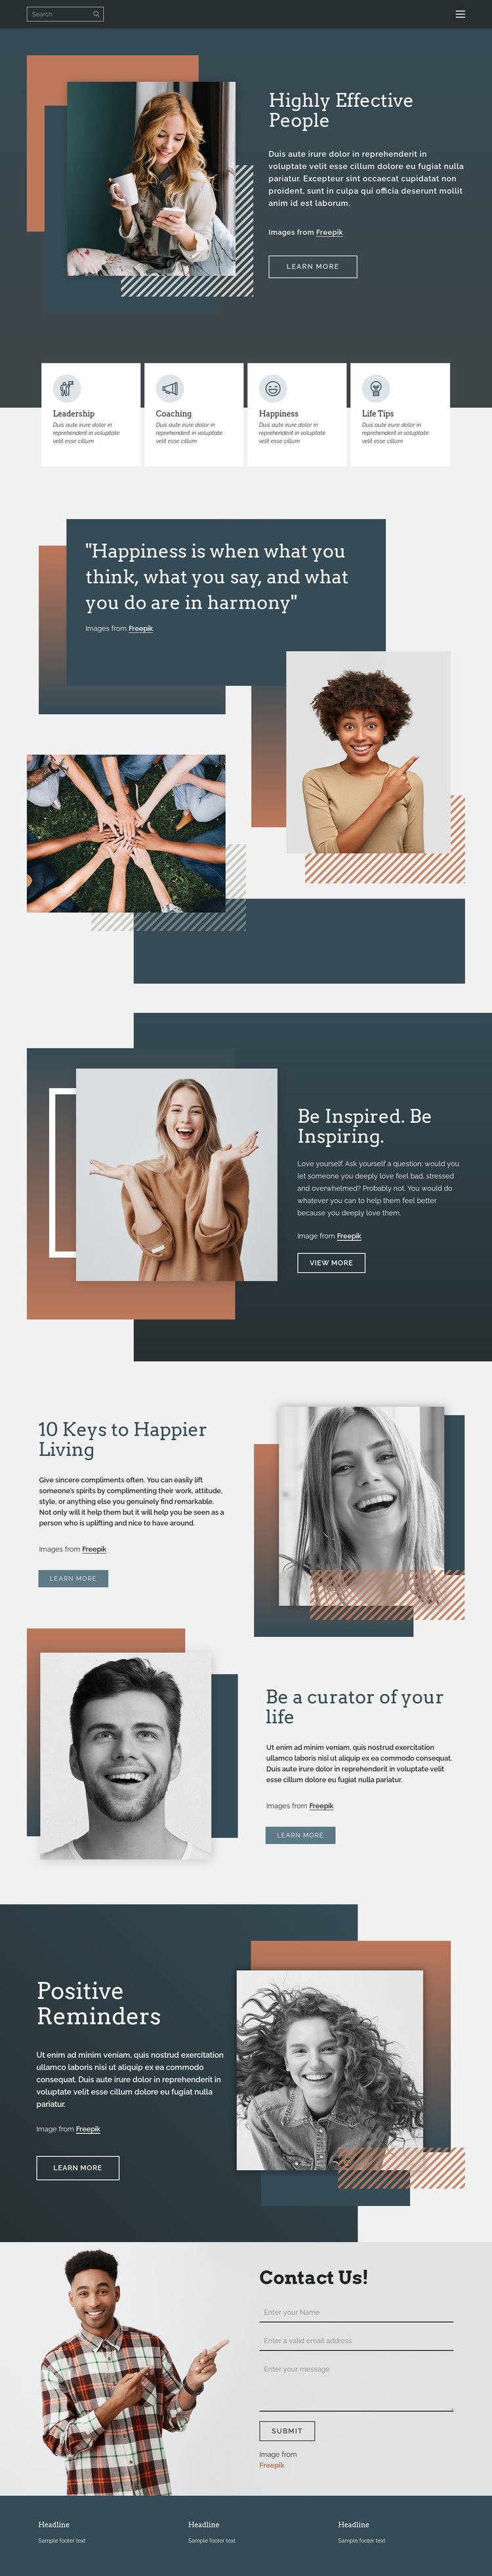 How to be successful in life Website Design